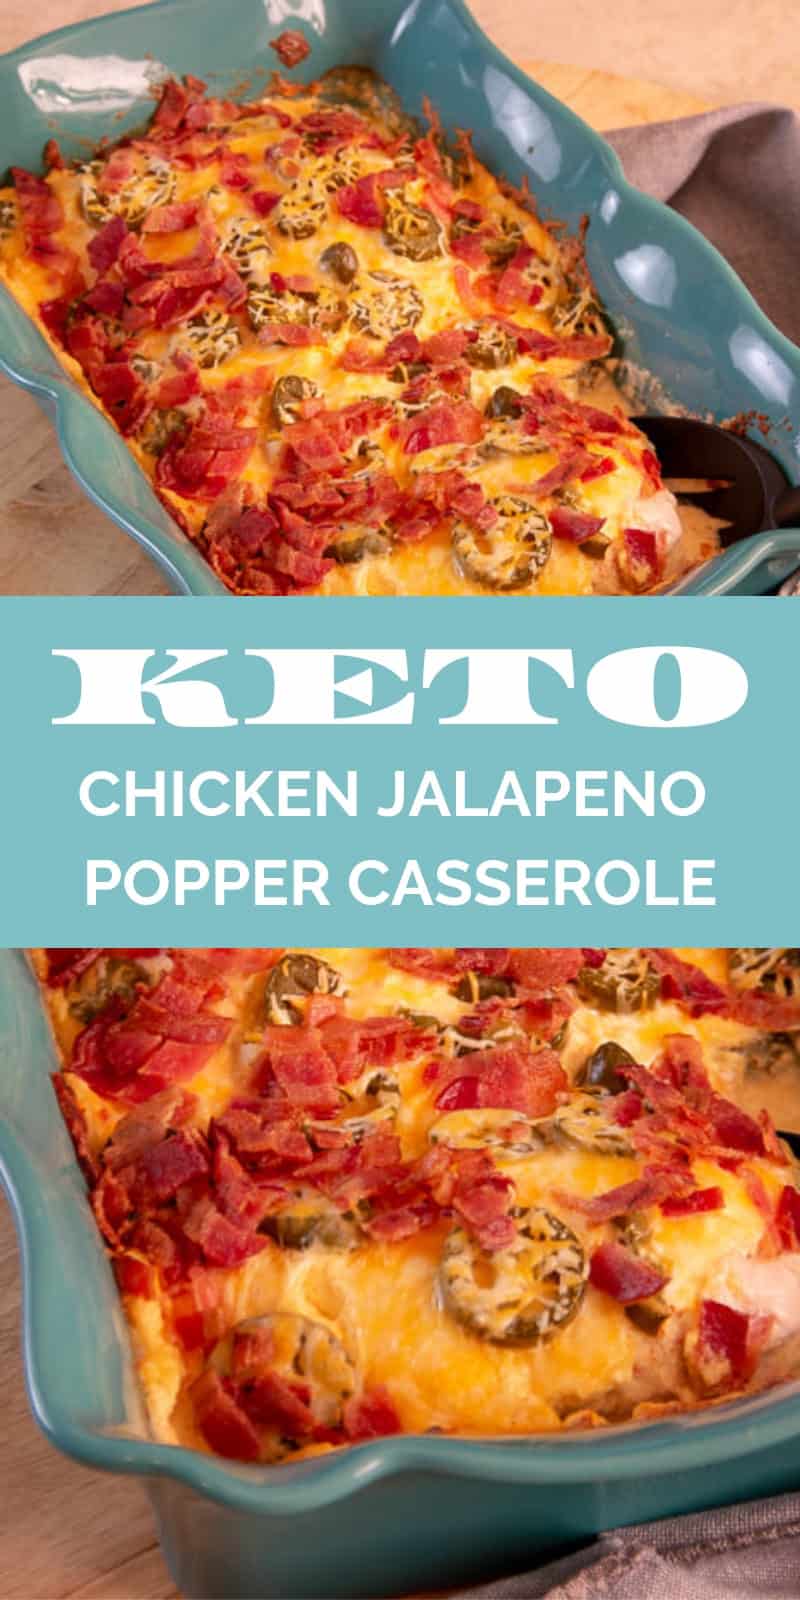 This Keto Chicken Jalapeno Popper Casserole Recipe is crazy easy to make and the whole family will enjoy it! They won't even know it's a keto dinner recipe!